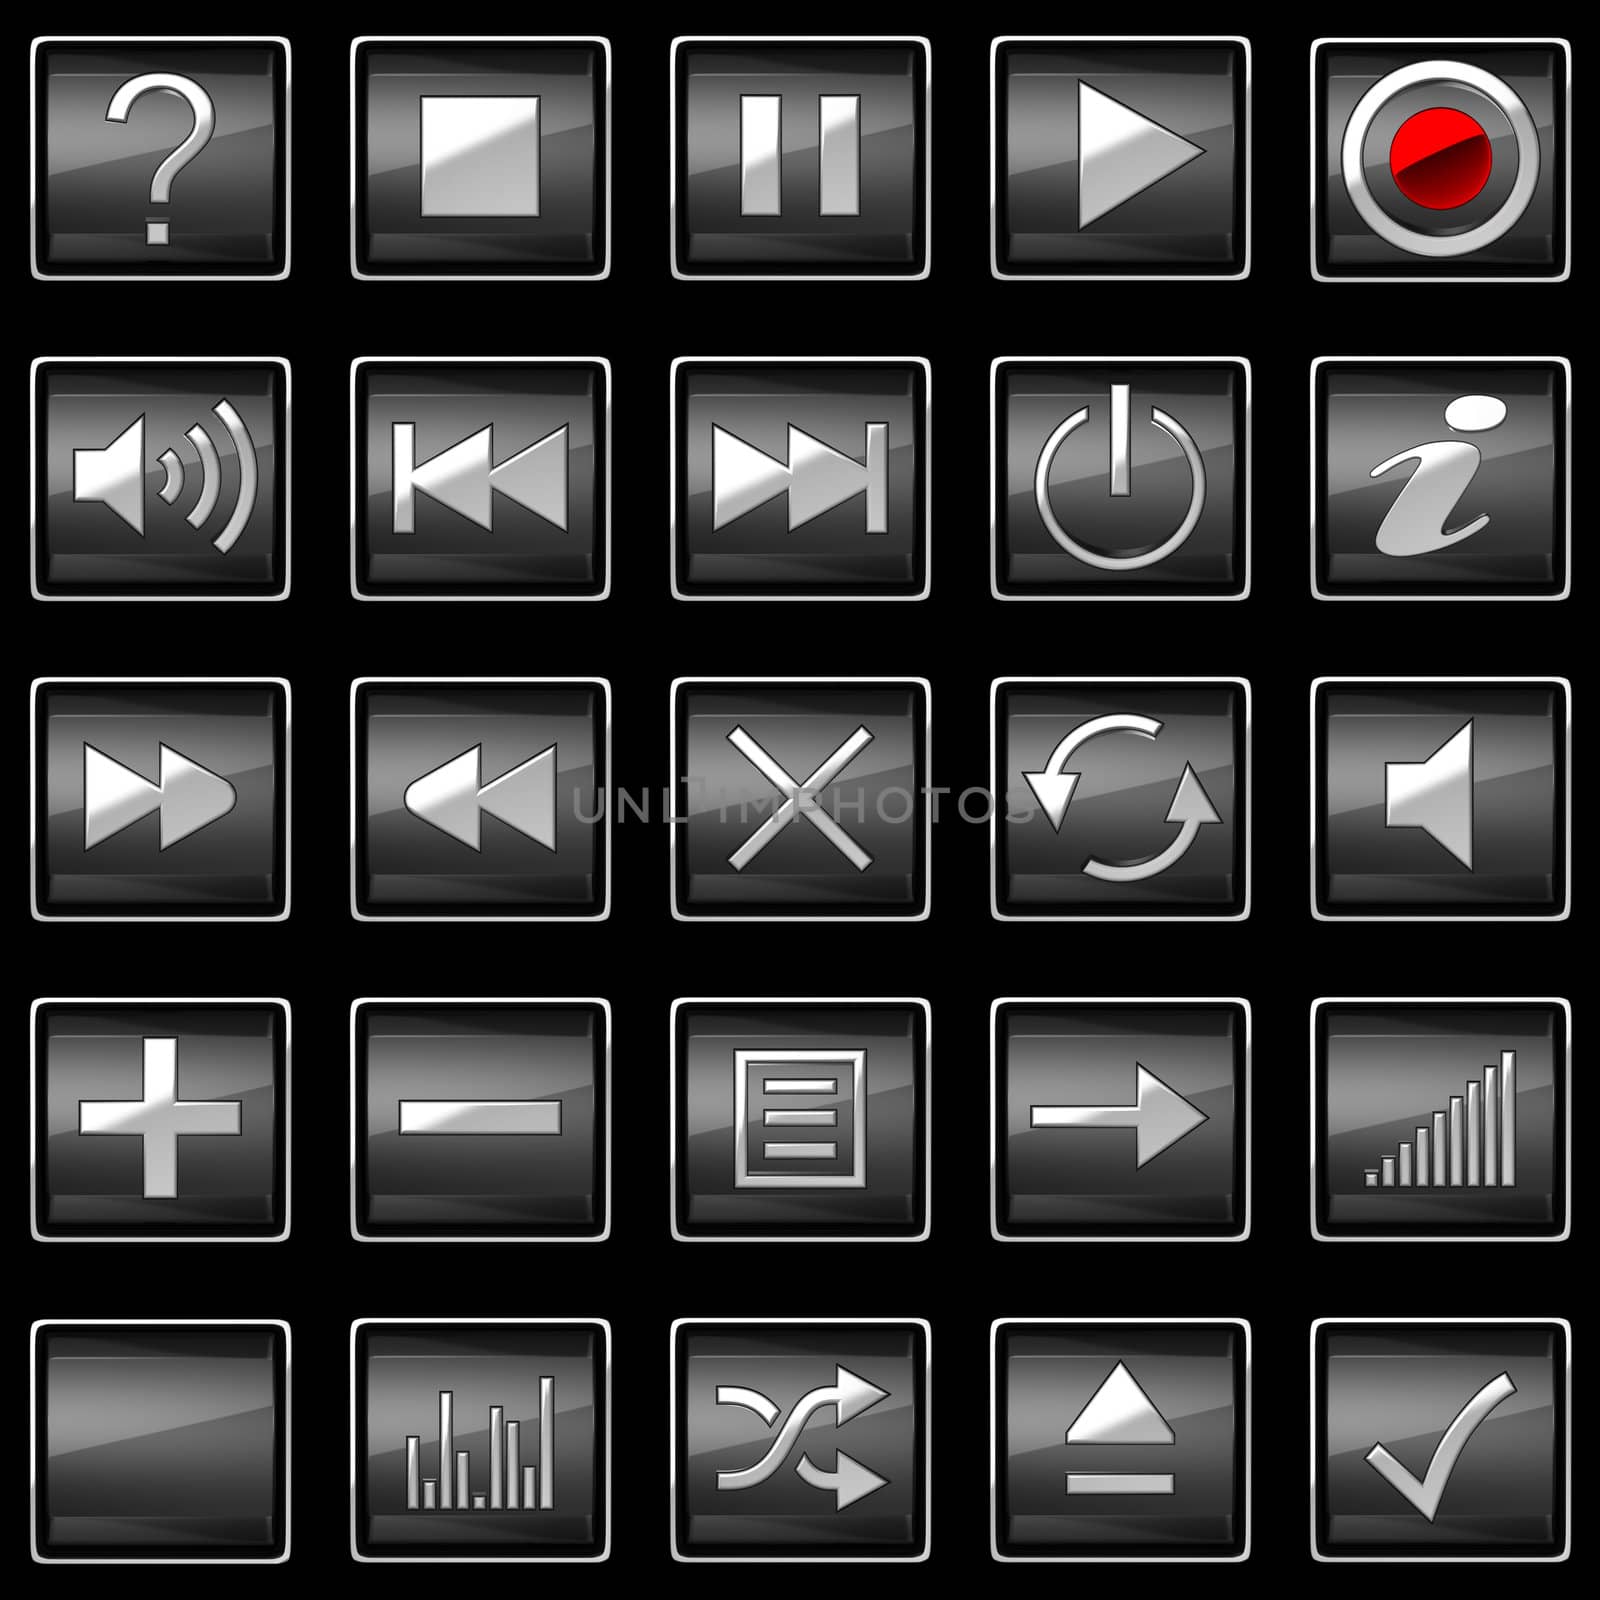 Square pressed Control panel buttons isolated on black